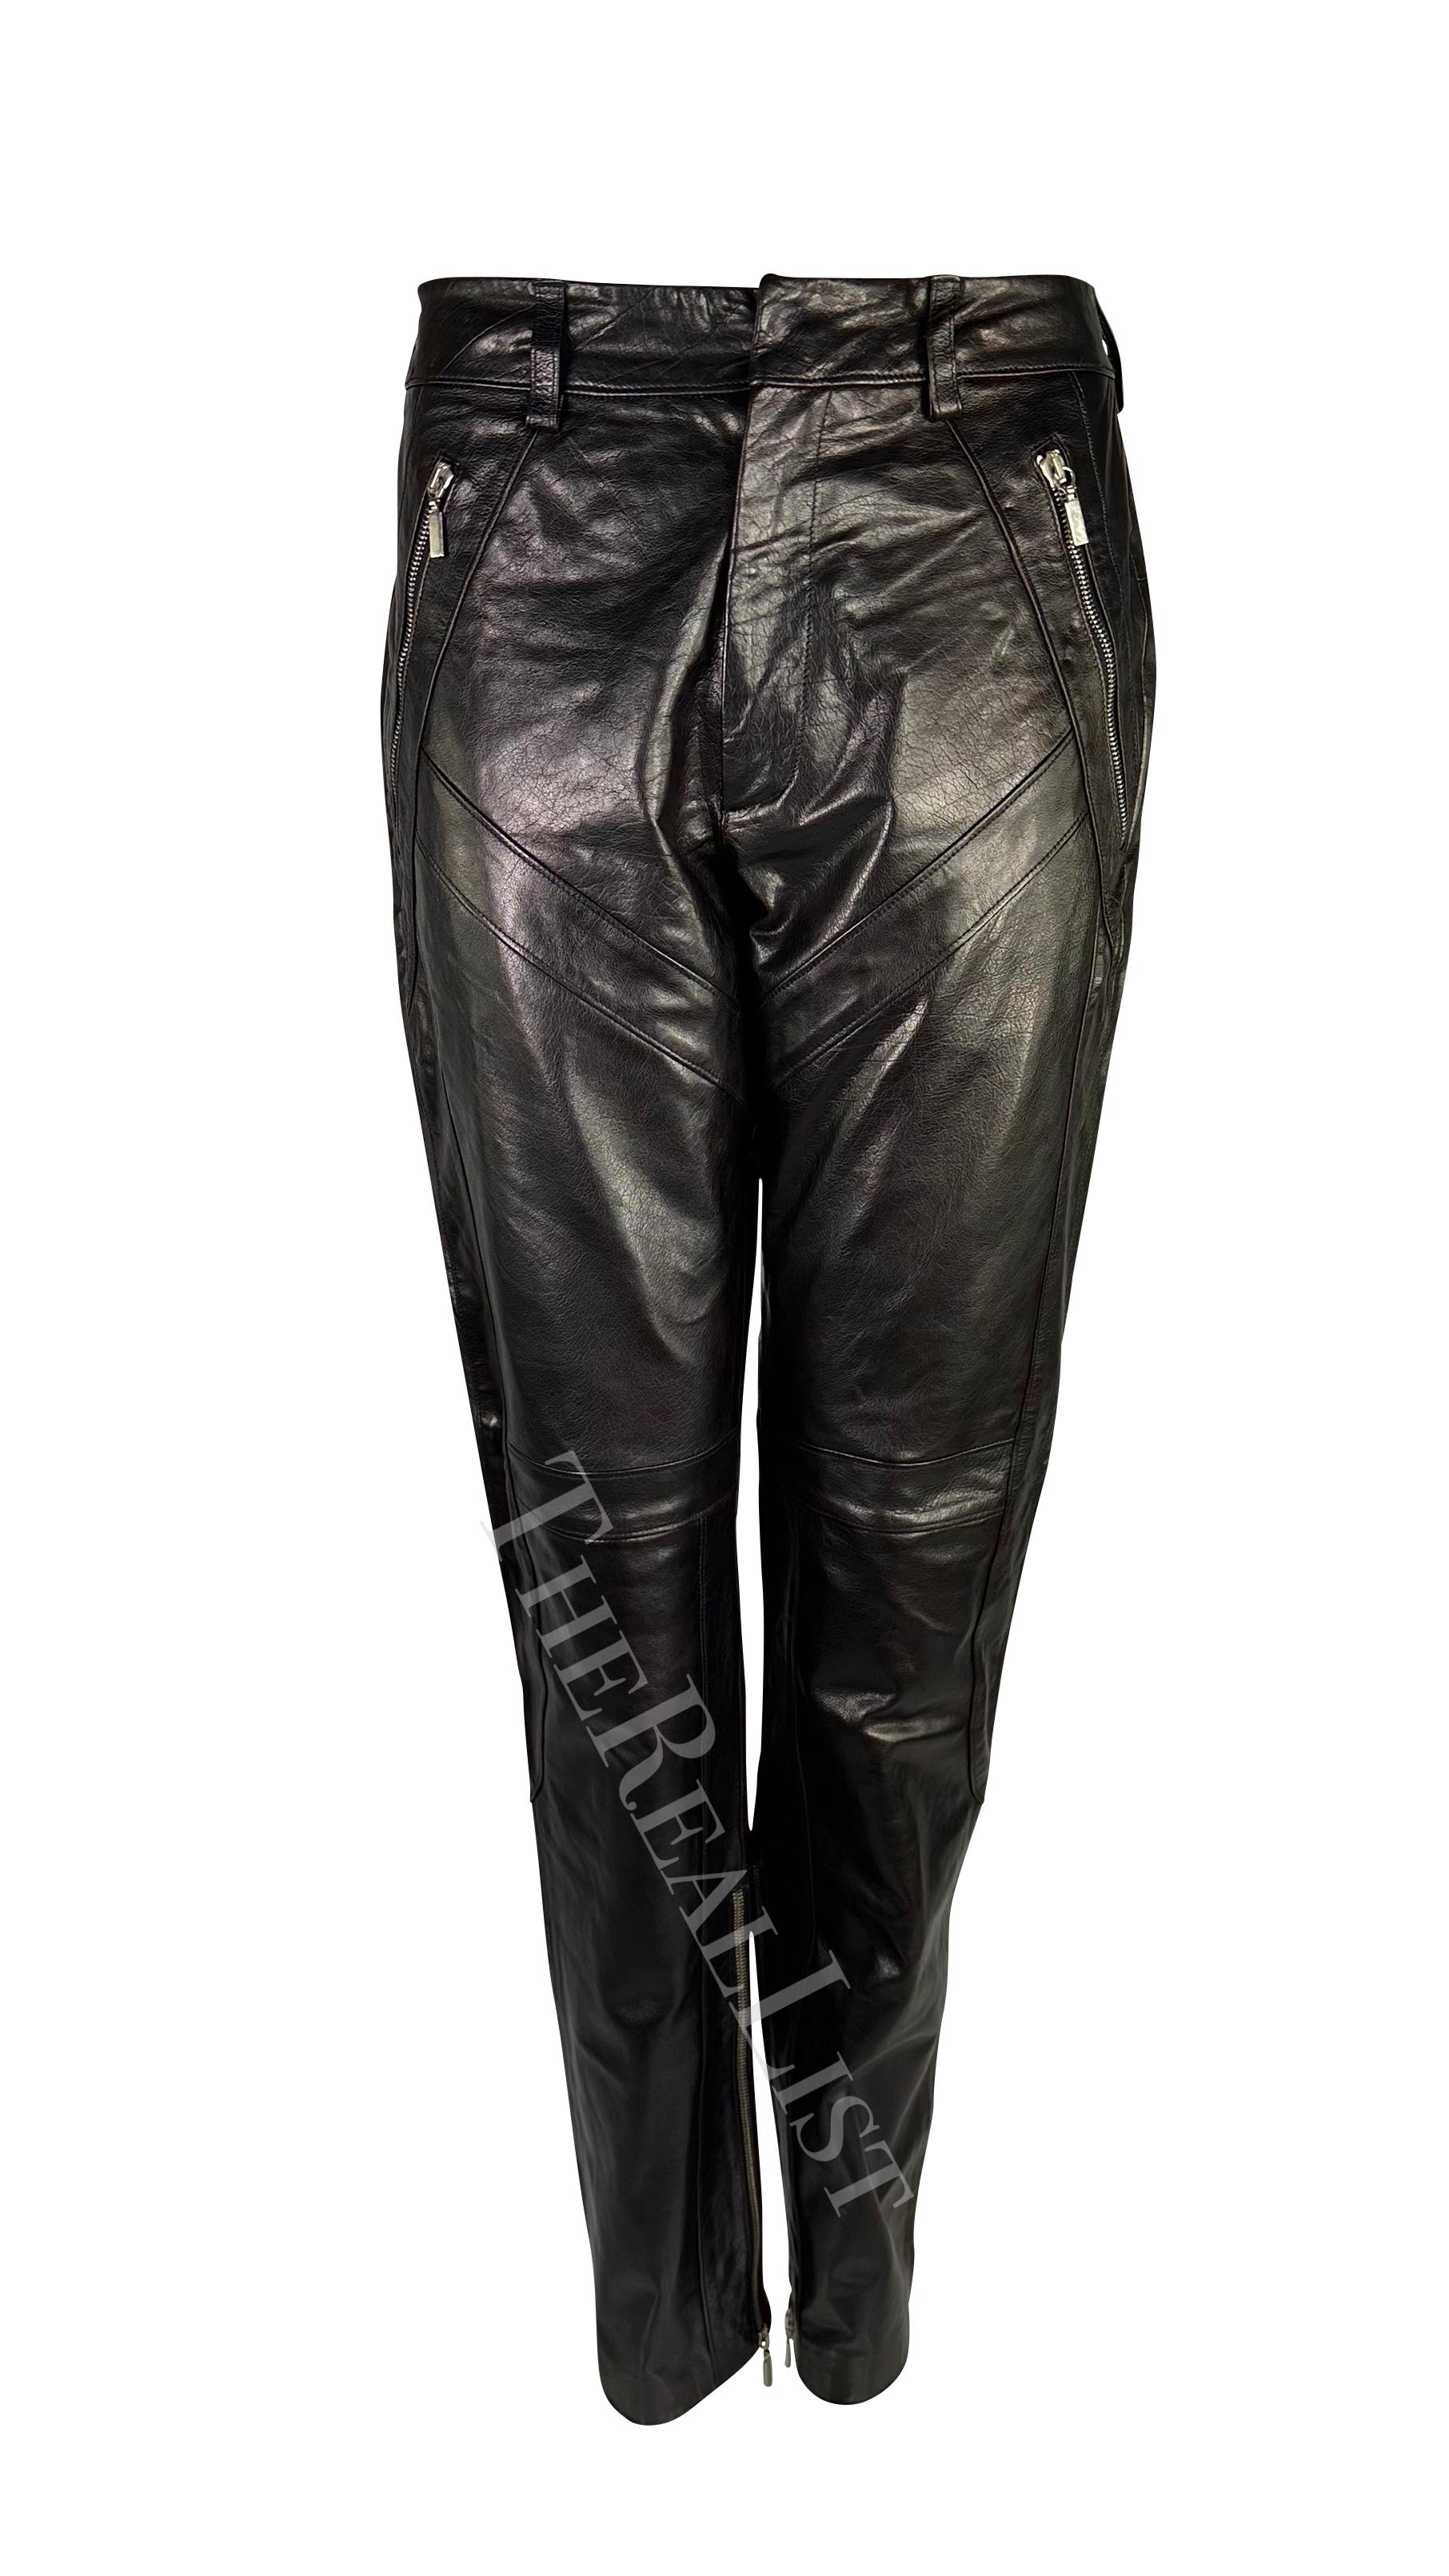 S/S 2002 Gianni Versace by Donatella Black Leather Moto Style Zip Pants In Excellent Condition For Sale In West Hollywood, CA